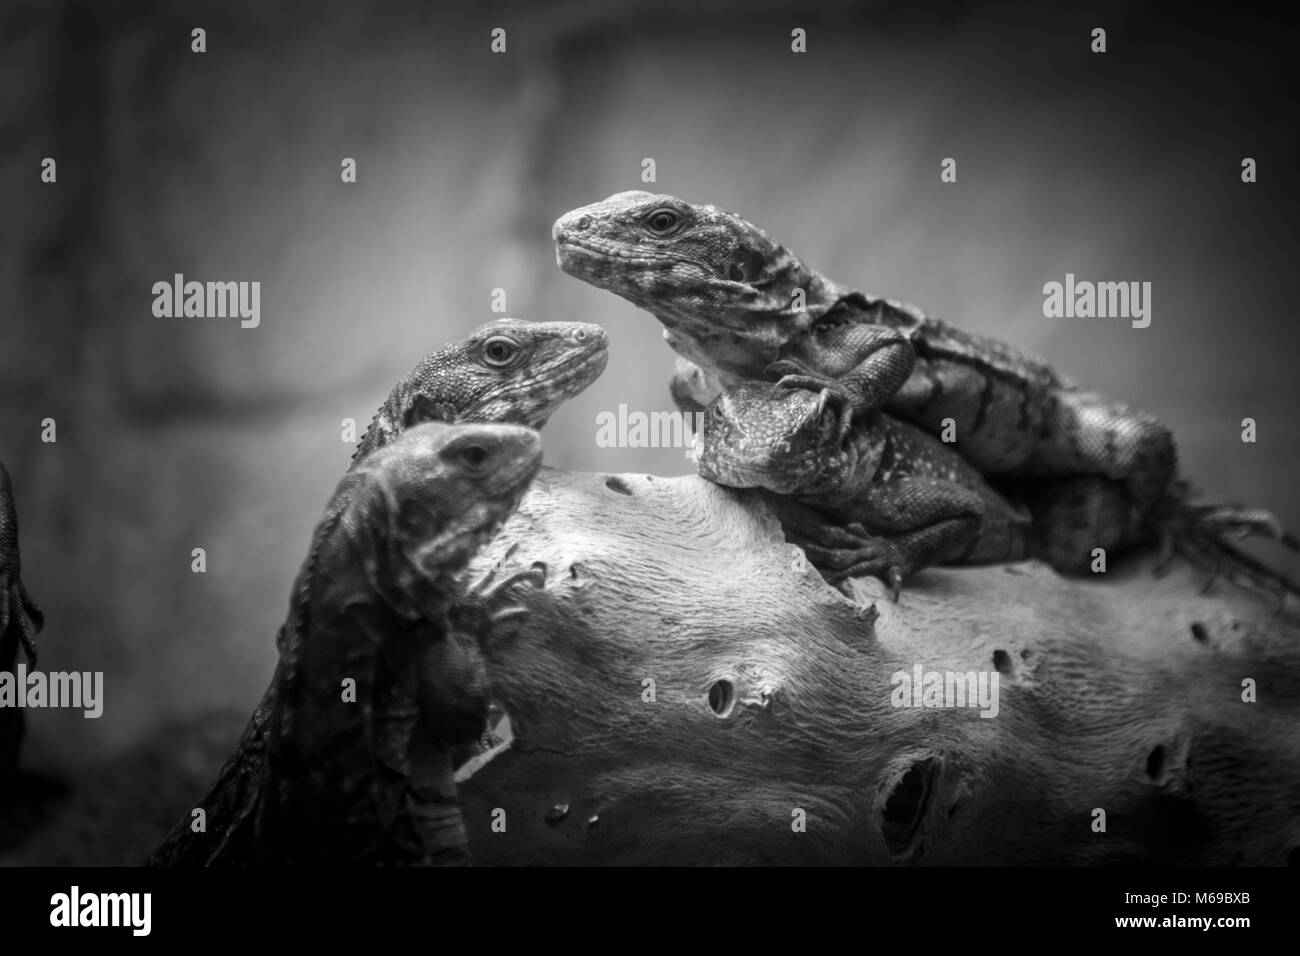 a trio of lizards close up in black and white Stock Photo